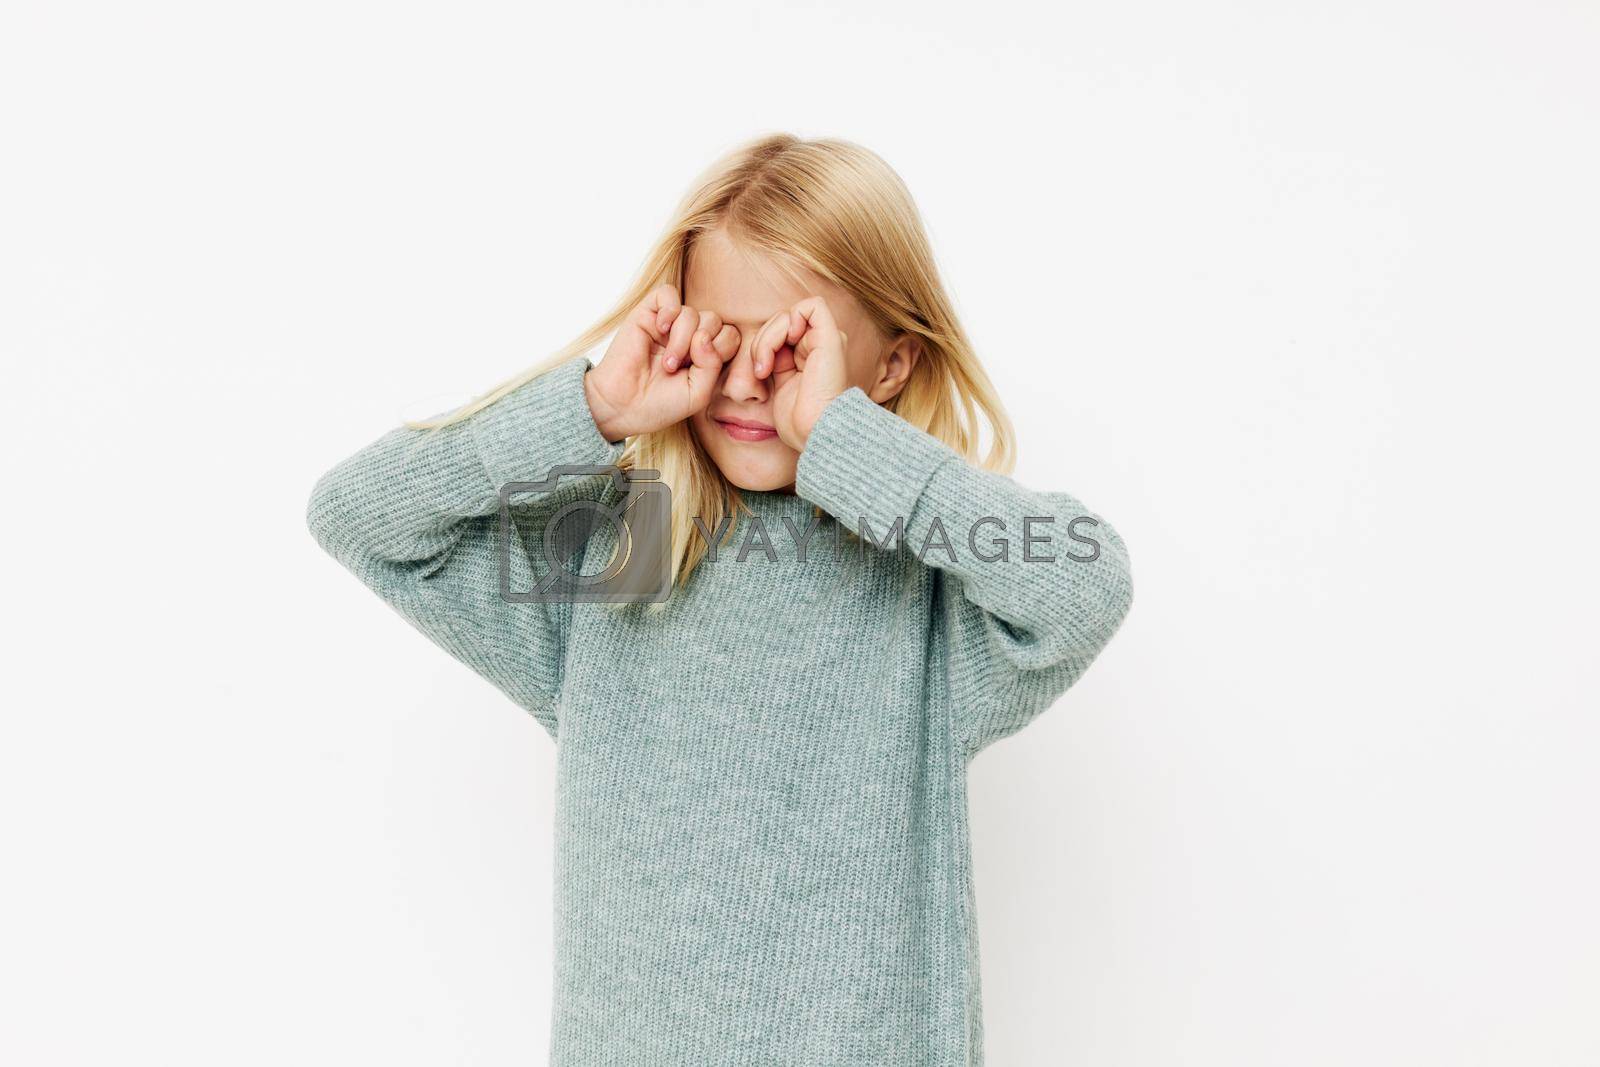 Royalty free image of happy cute girl in a sweater, grimaces cropped view by SHOTPRIME